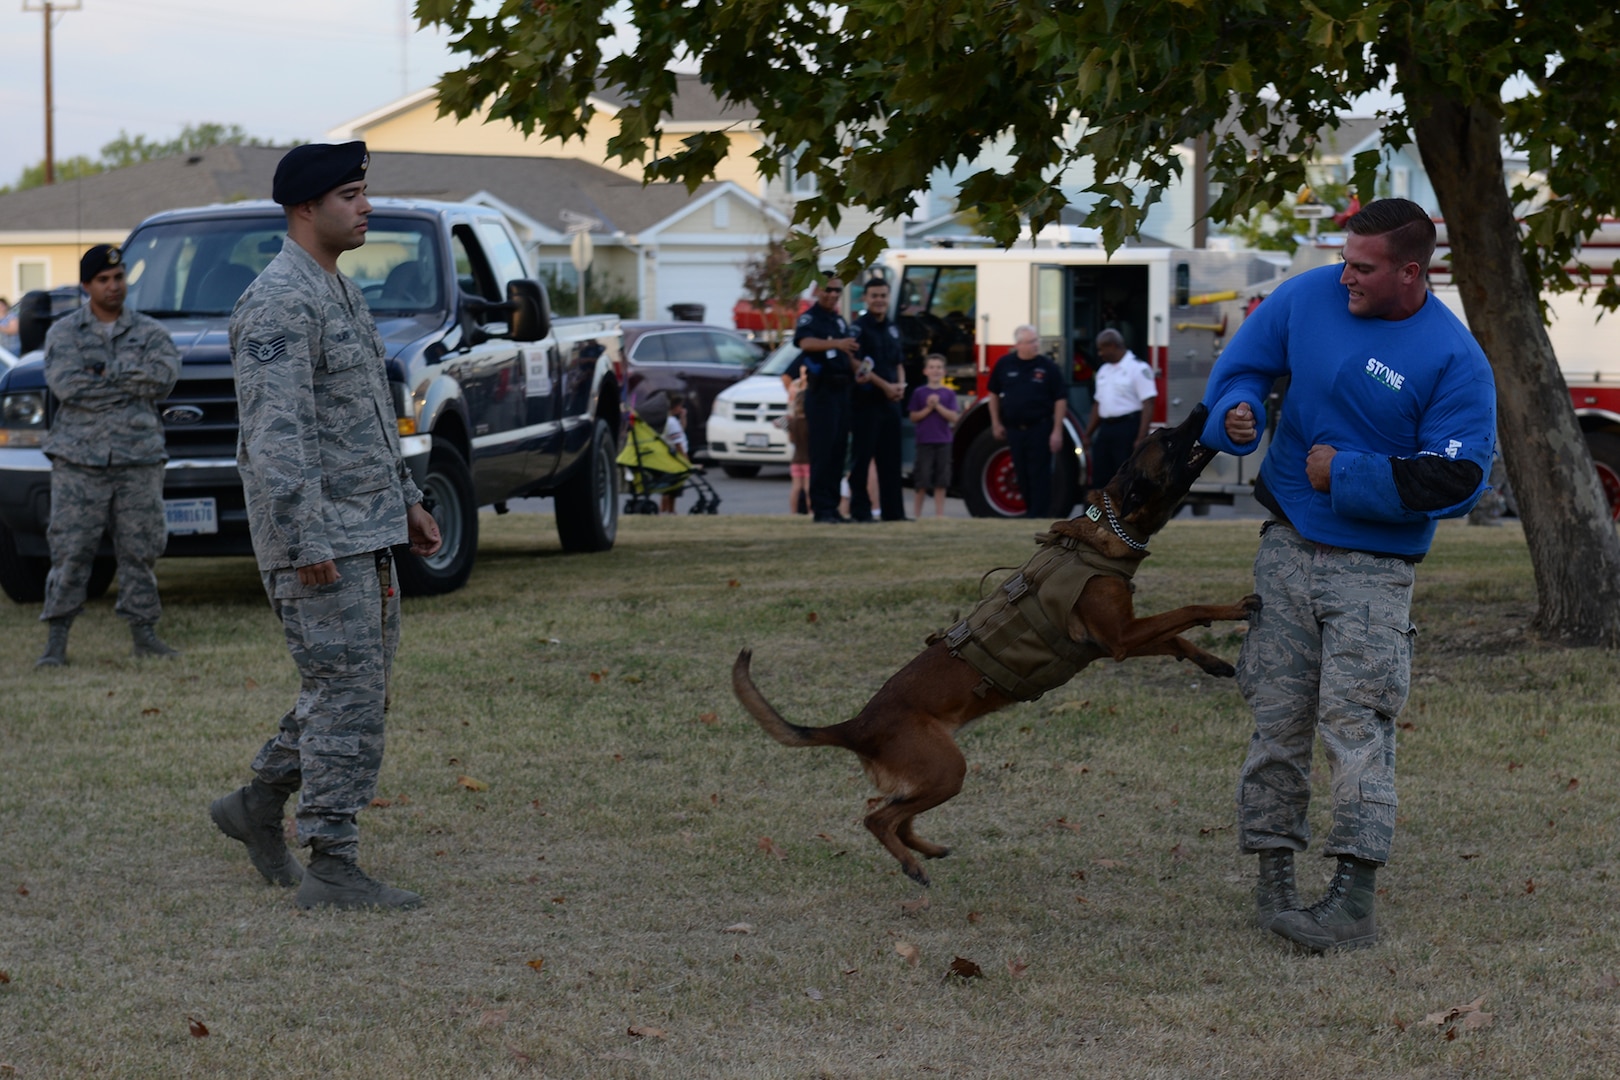 Military Working Dog Sonja attacks Senior Airman Travis Counts, 802nd Security Forces Squadron MWD handler, as her handler, Staff Sgt. Paul Olmos, 802nd SFS, watches on as part of a demonstration during National Night Out Oct. 6, 2015, at Joint Base San Antonio-Lackland, Texas. At the annual event there was also a bouncy castle, police cars, fire trucks, a Humvee, face painting station, firearms display, a station that taught how to use a taser and a station that taught children scare away attackers with a baton. (U.S. Air Force photo by Senior Airman Krystal Wright/Released)